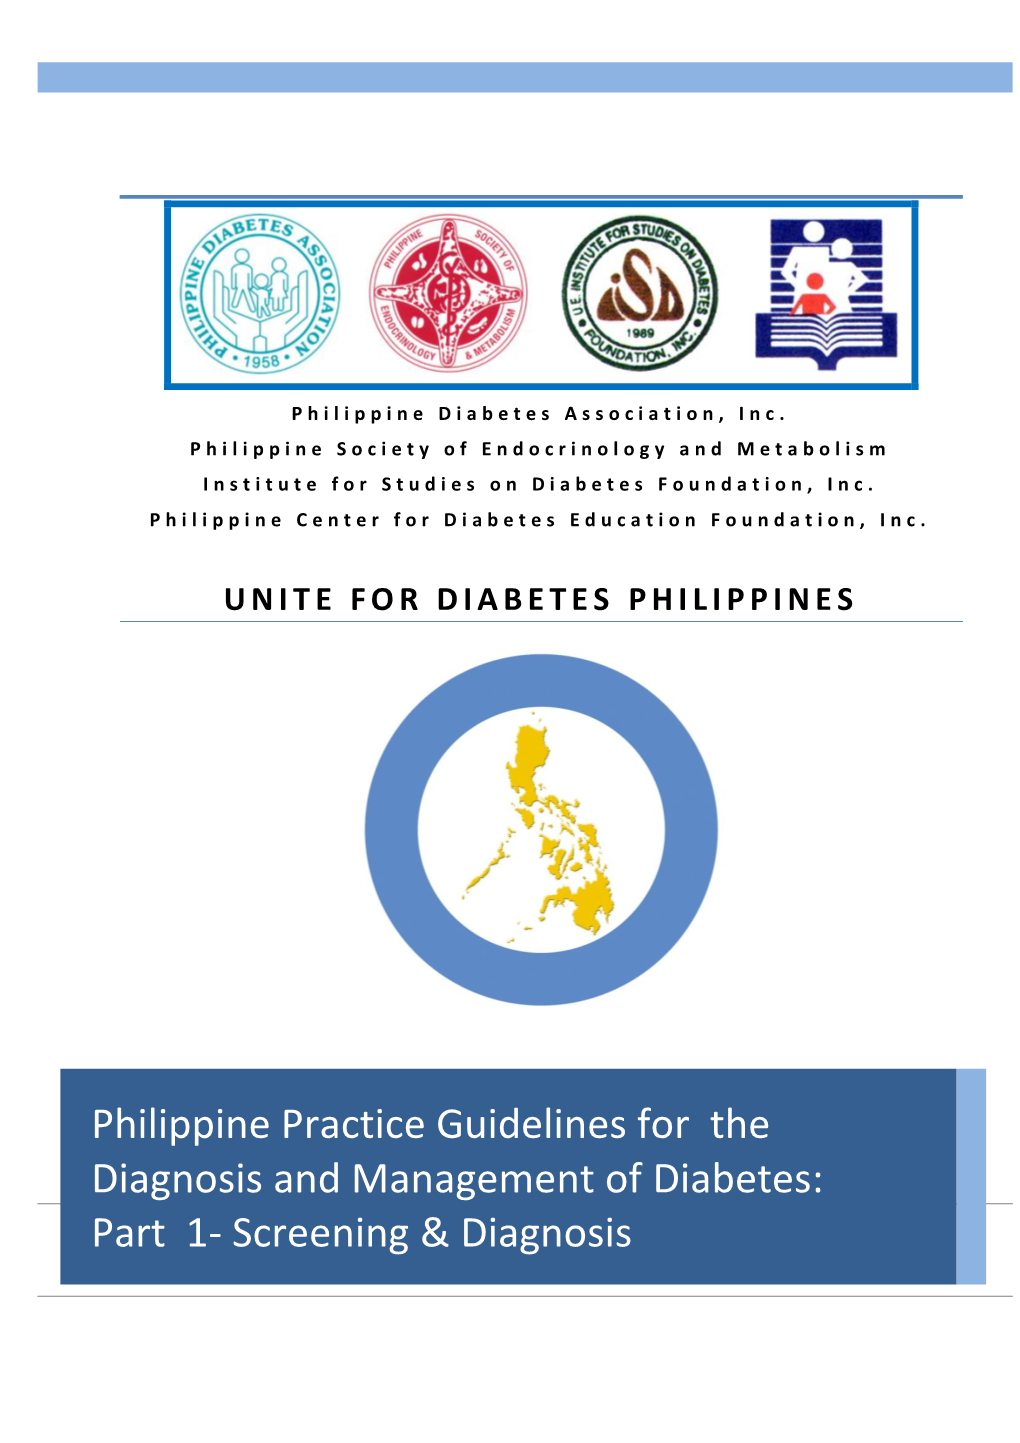 Philippine Practice Guidelines on the Diagnosis and Management of Diabetes Mellitus